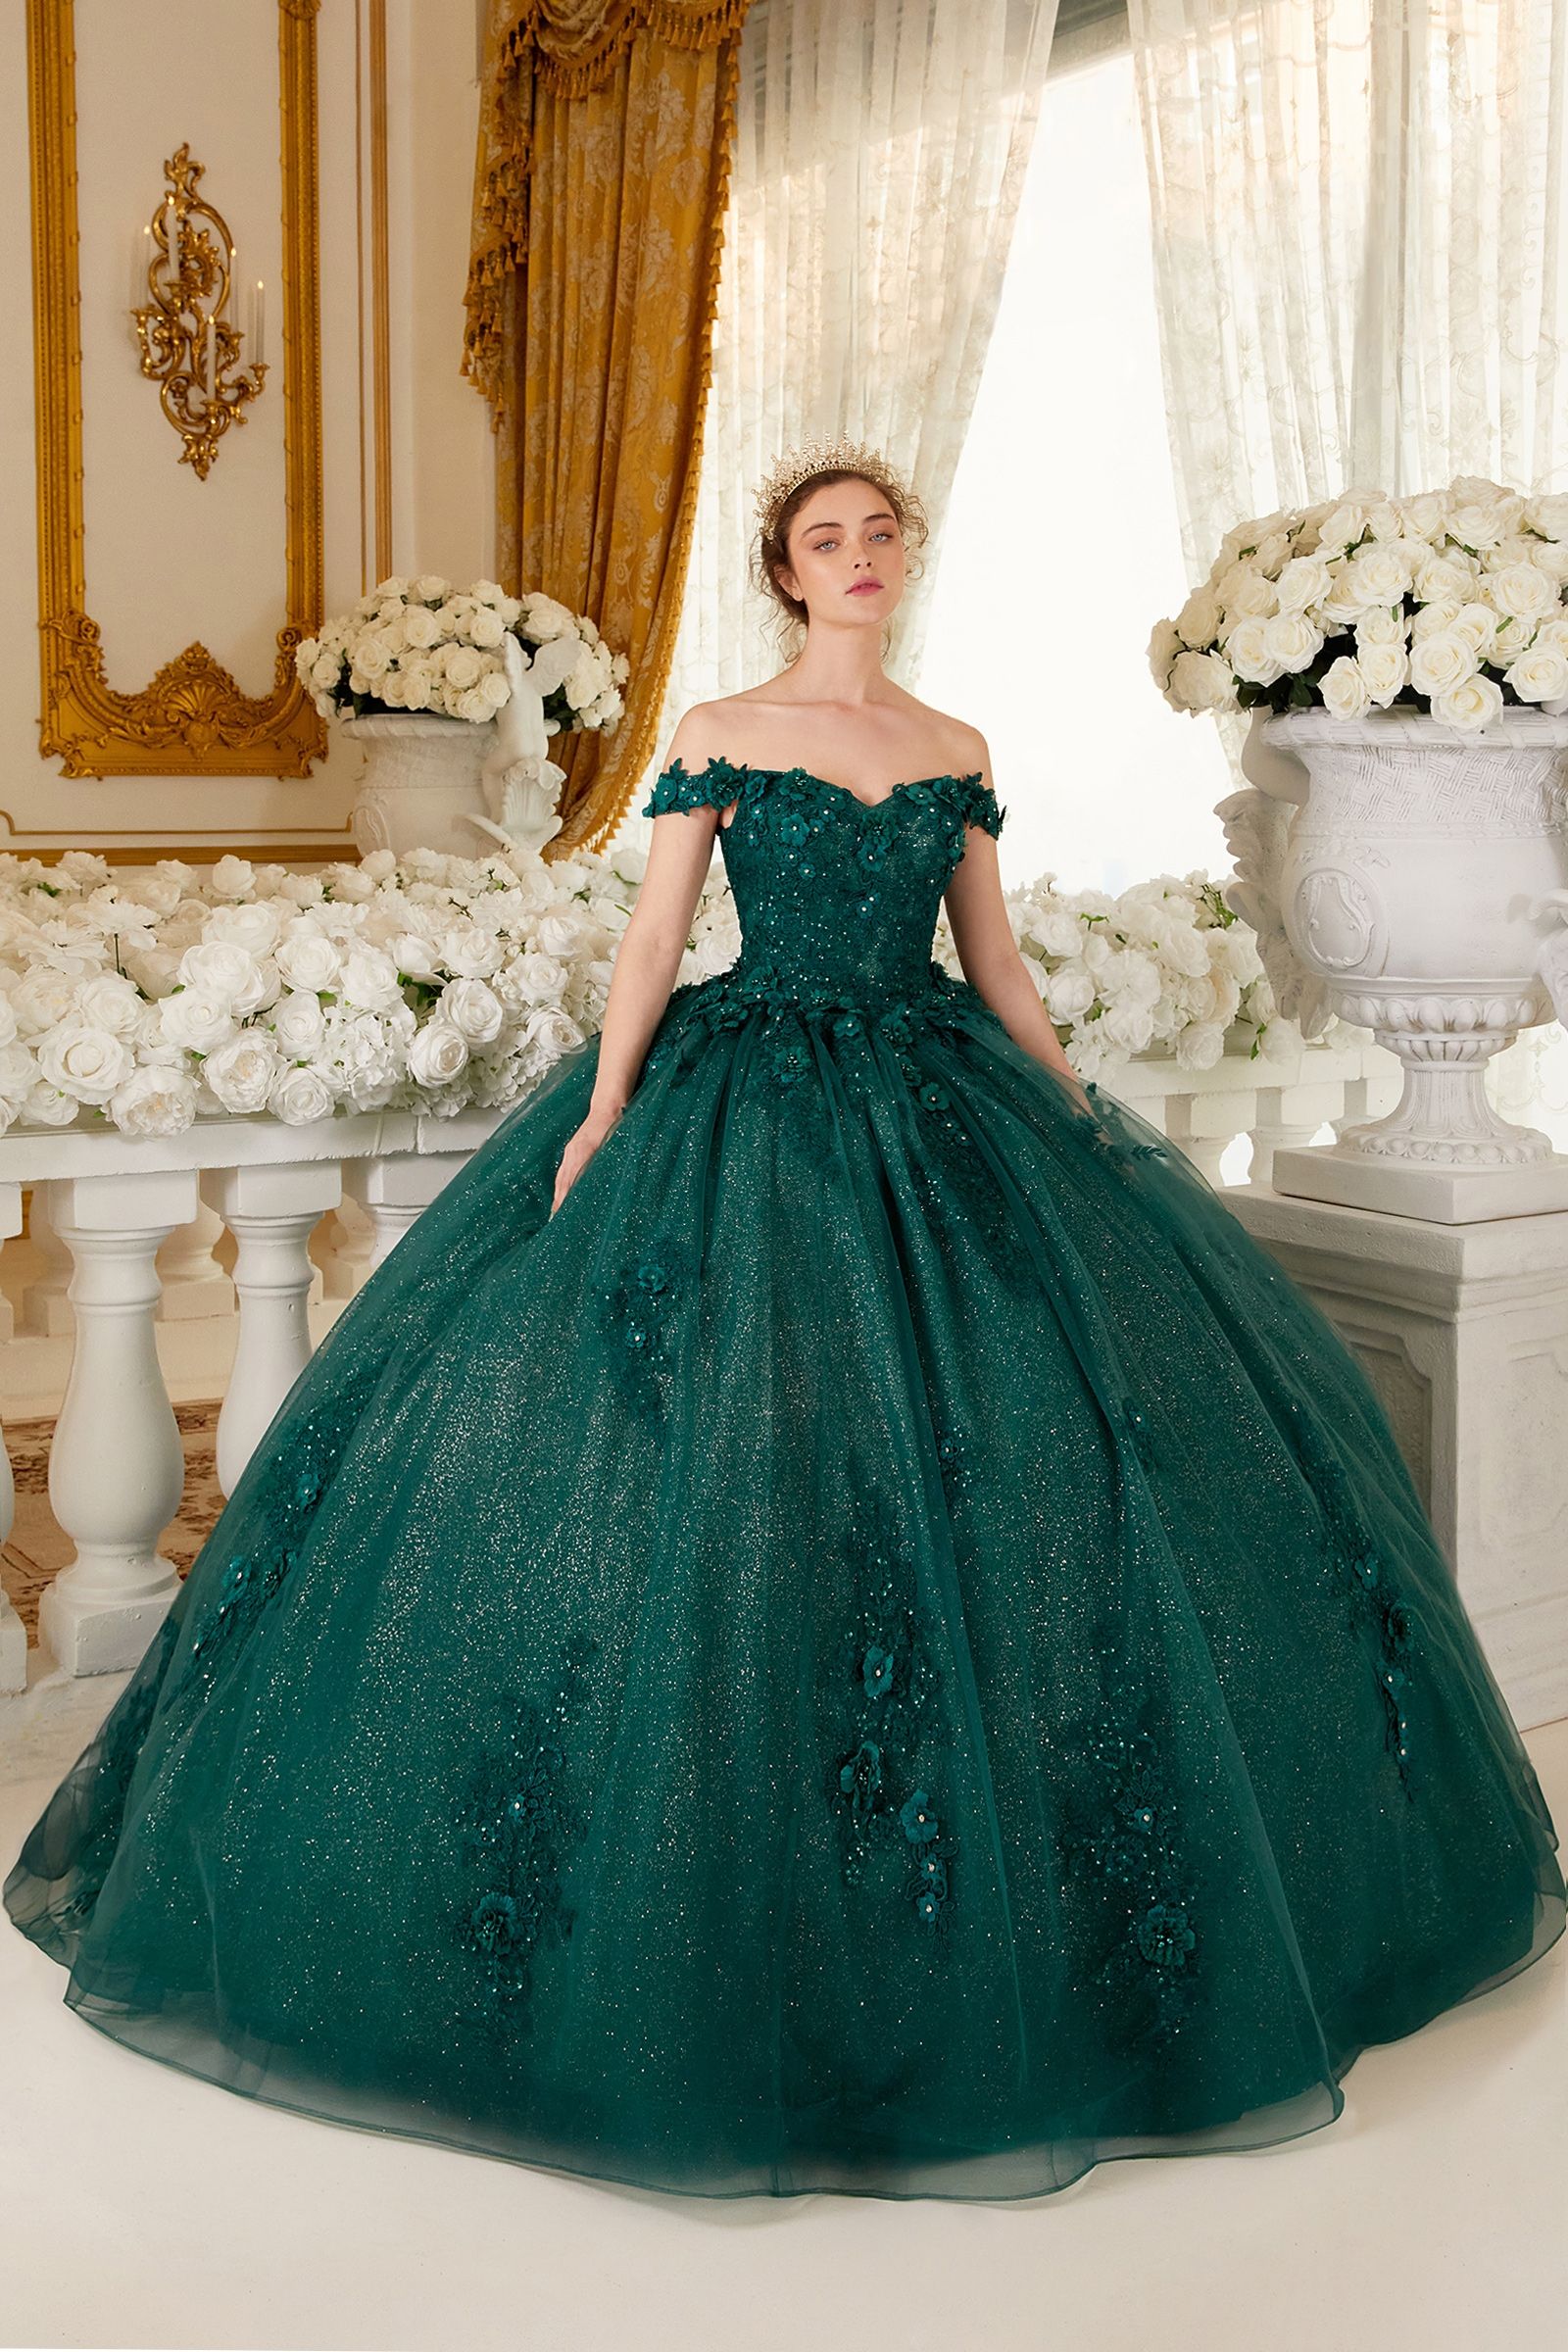 Unleash your inner princess with this Ladivine 15702 Off The Shoulder Shimmer Lace Quinceanera Ballgown Dress Formal Gown! Flaunt your radiant beauty in this romantic, glittery tulle ball gown, featuring a sweetheart neckline and off-shoulder lace and floral appliques. The gorgeous layered skirt sparkles magnificently with floral appliques, and the lace-up corset back closure ensures a perfectly tailored fit. Get ready to look like the belle of the ball!